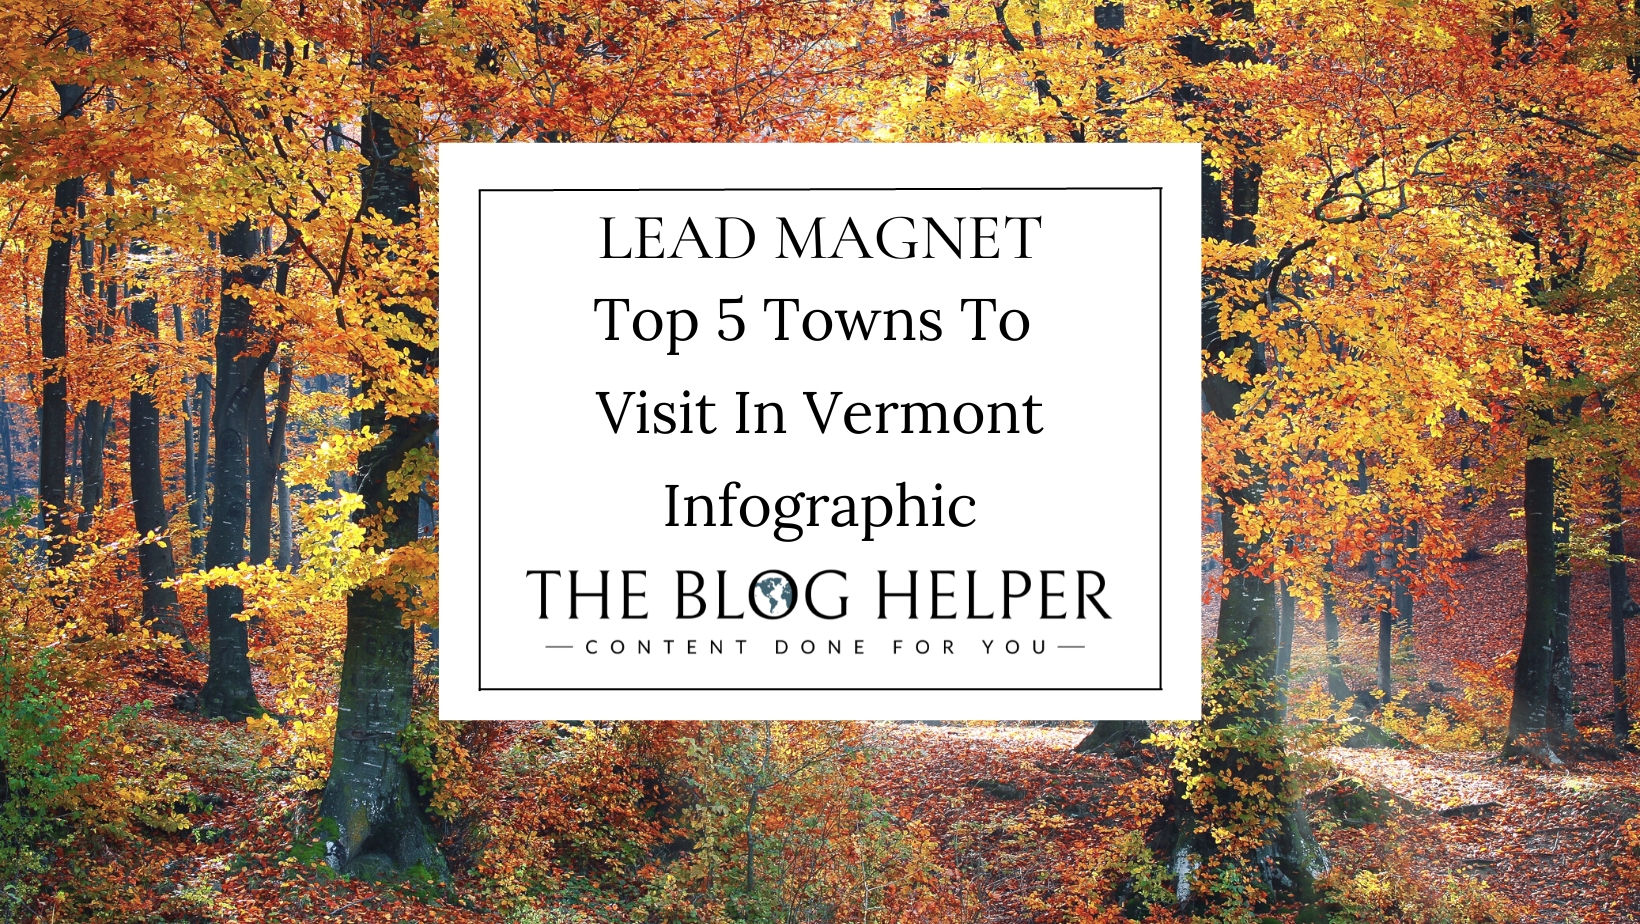 Top 5 Towns Vermont Fall Infographic Lead Magnet 